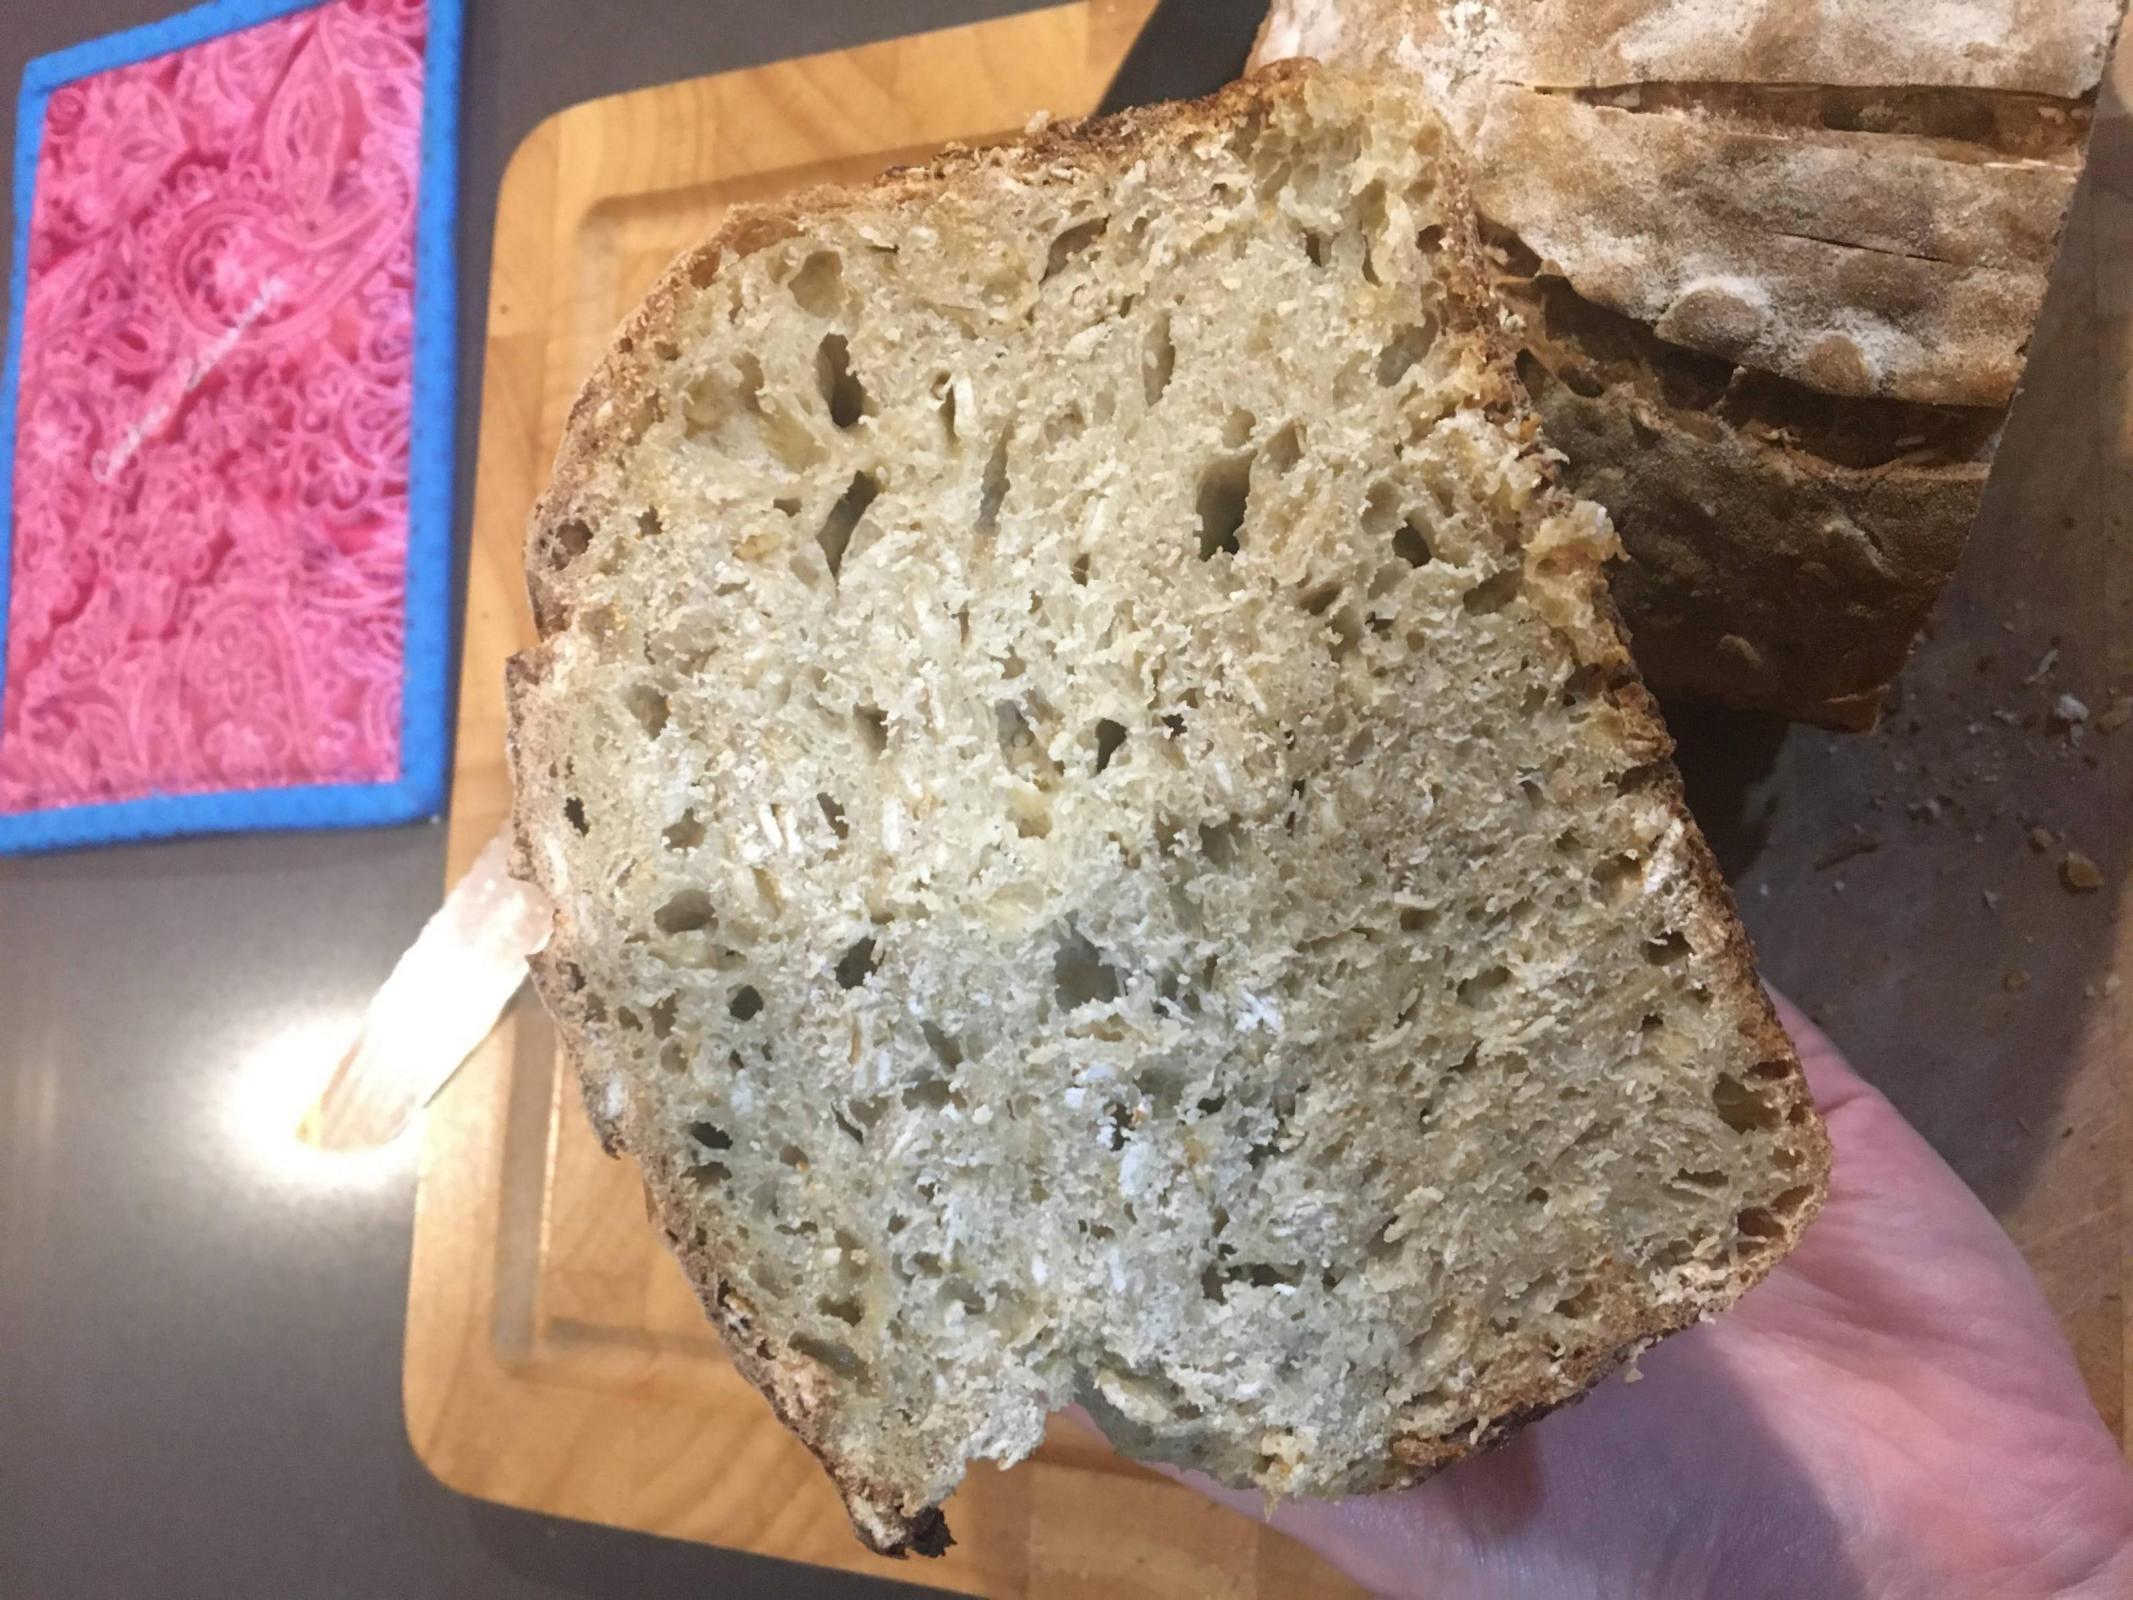 The interior of a loaf of bread. The crumb is tight. There are specks of oats.